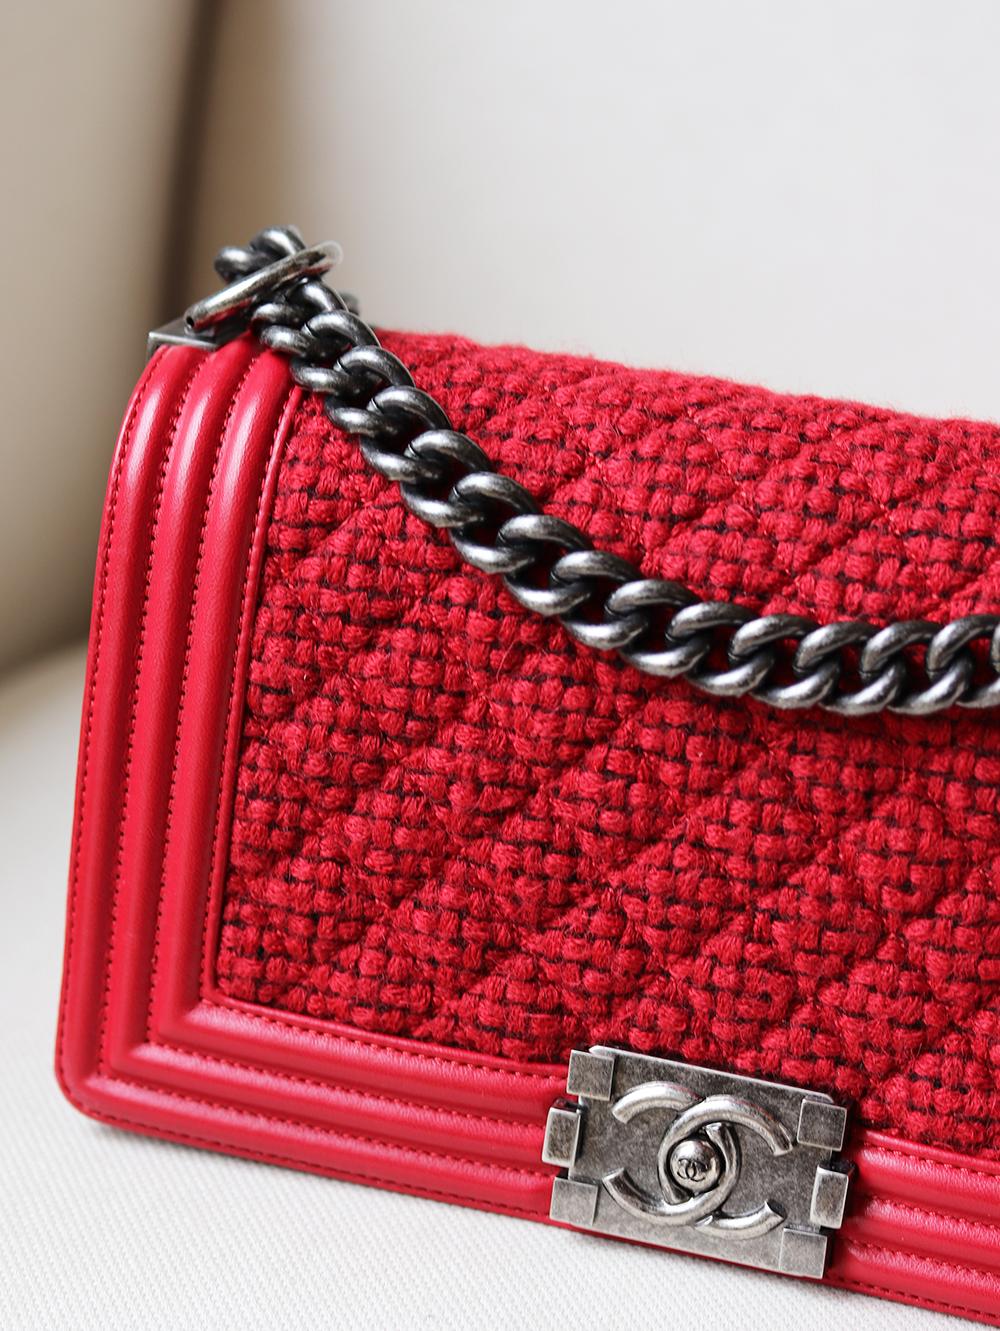 Chanel Leather and Tweed Boy Flap Bag has been hand-finished by skilled artisans in the label's workshop.
Boasting soft red lambskin-leather and textured tweed exterior, this design is accented with silver-toned and red lambskin-leather chain